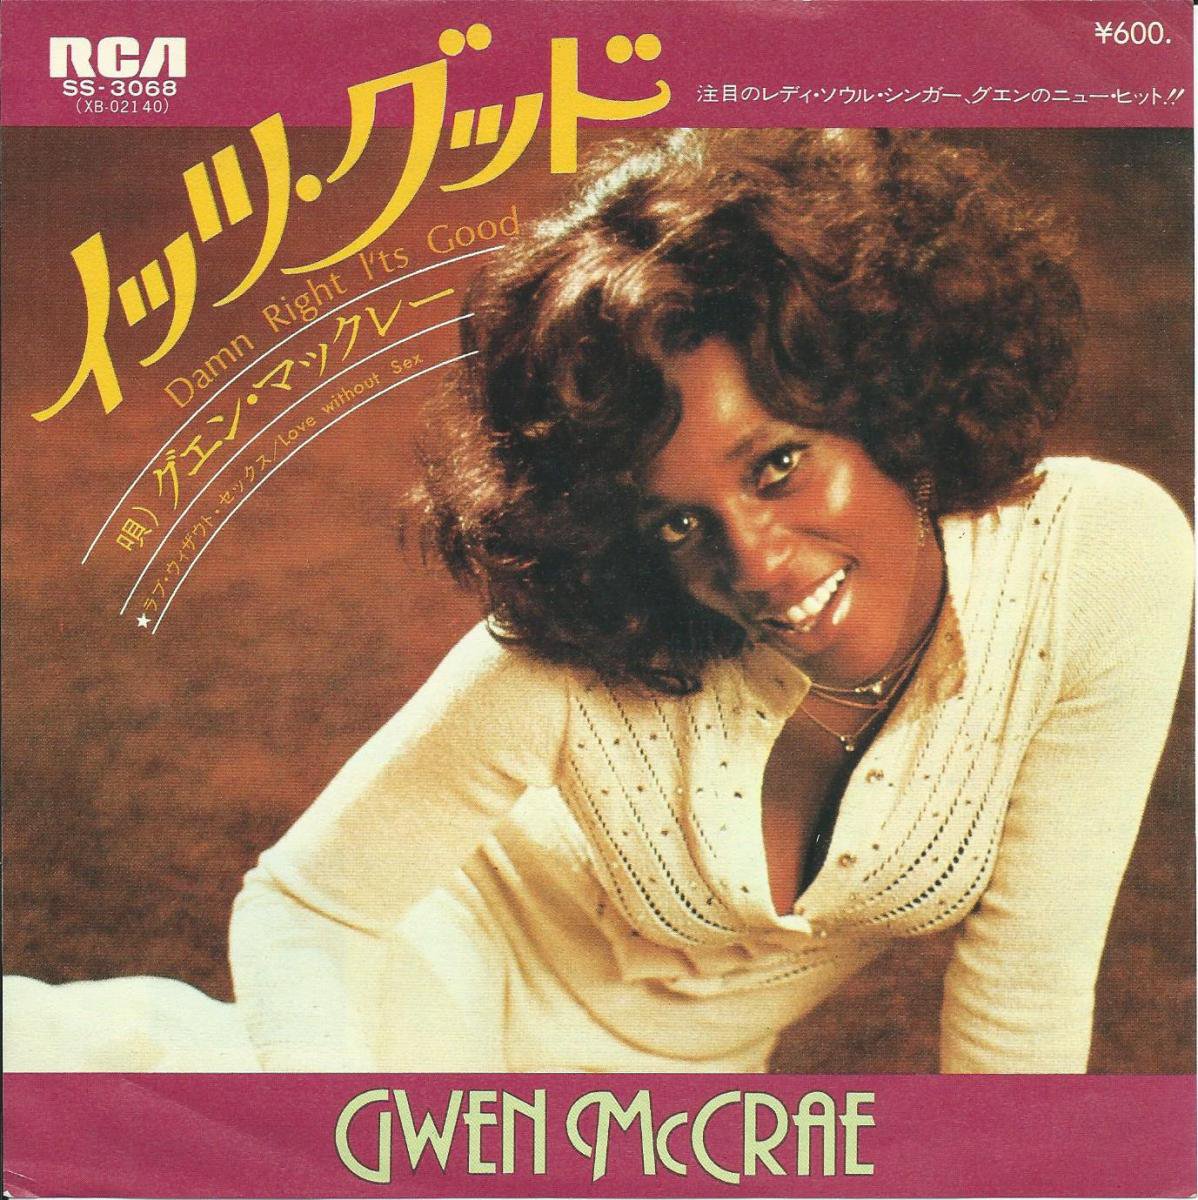 Gwen Mccrae Love Without Sex 22